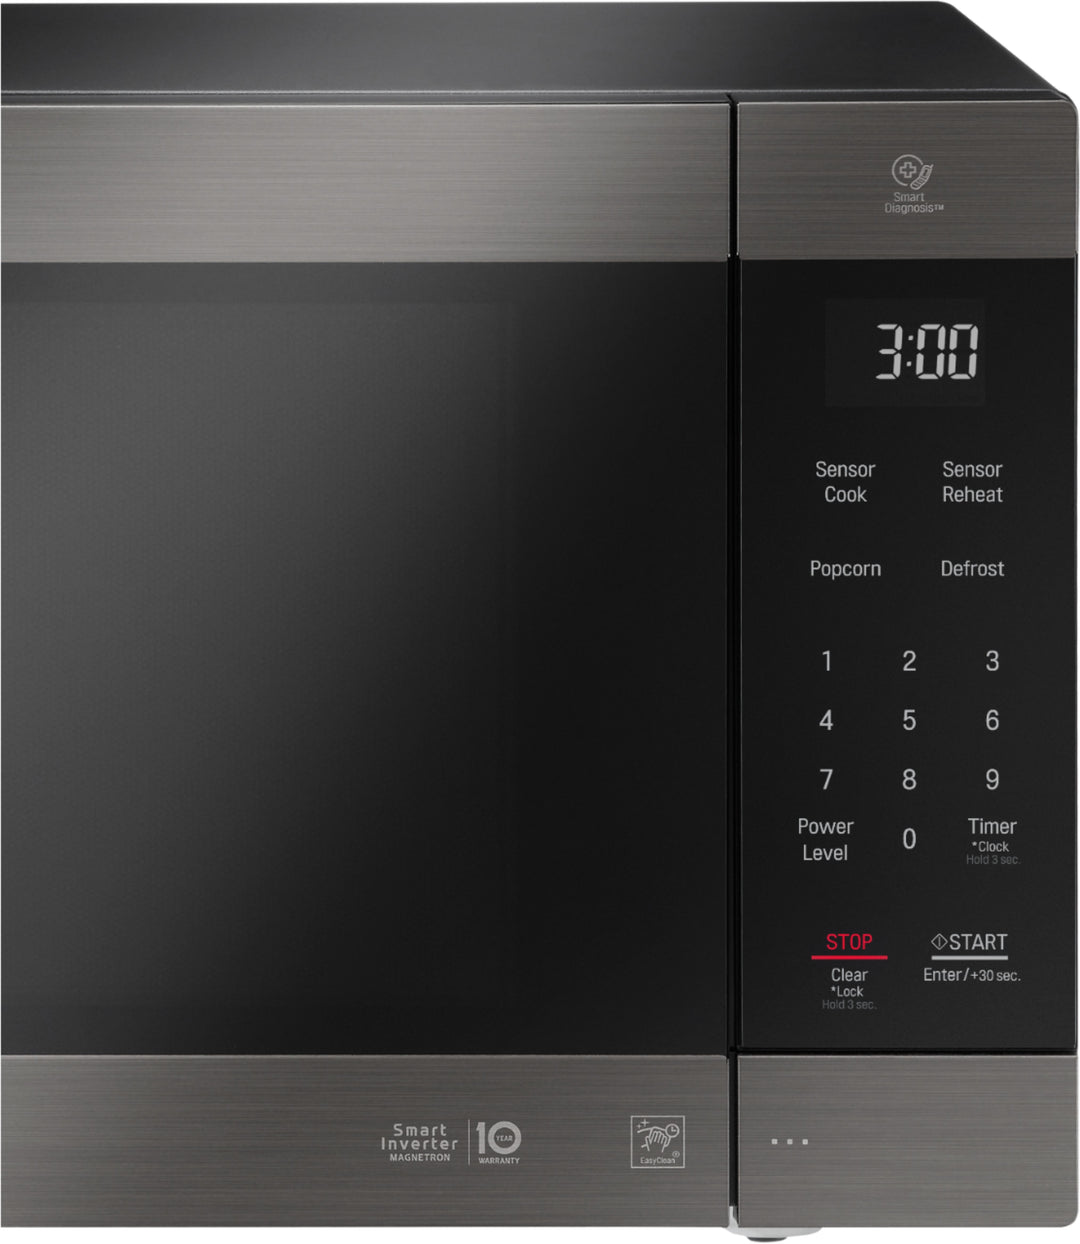 LG - NeoChef 2.0 Cu. Ft. Countertop Microwave with Smart Inverter and EasyClean - Black stainless steel_3